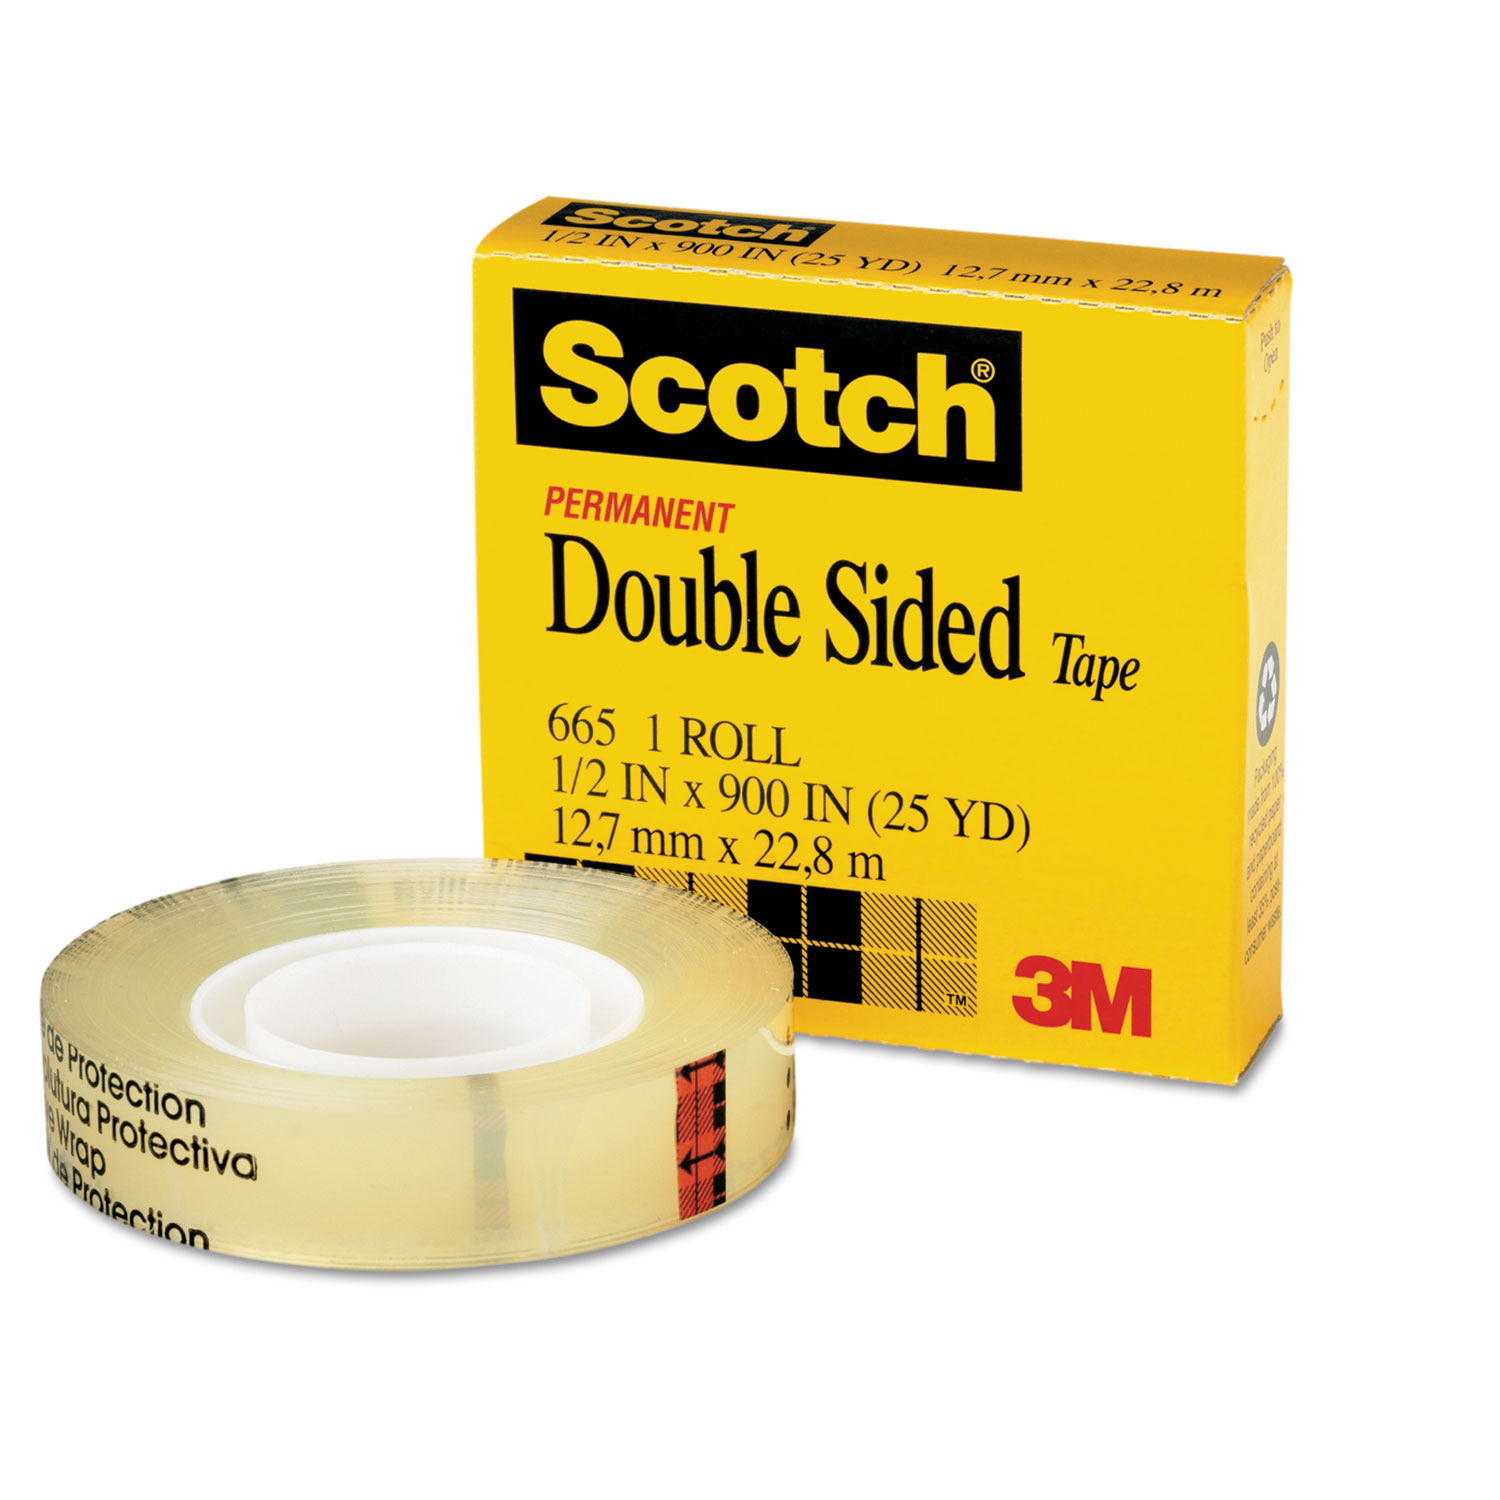  Scotch 665 Double-Sided Tape, 1 Core, 0.5 x 75 ft, Clear (MMM66512900) 